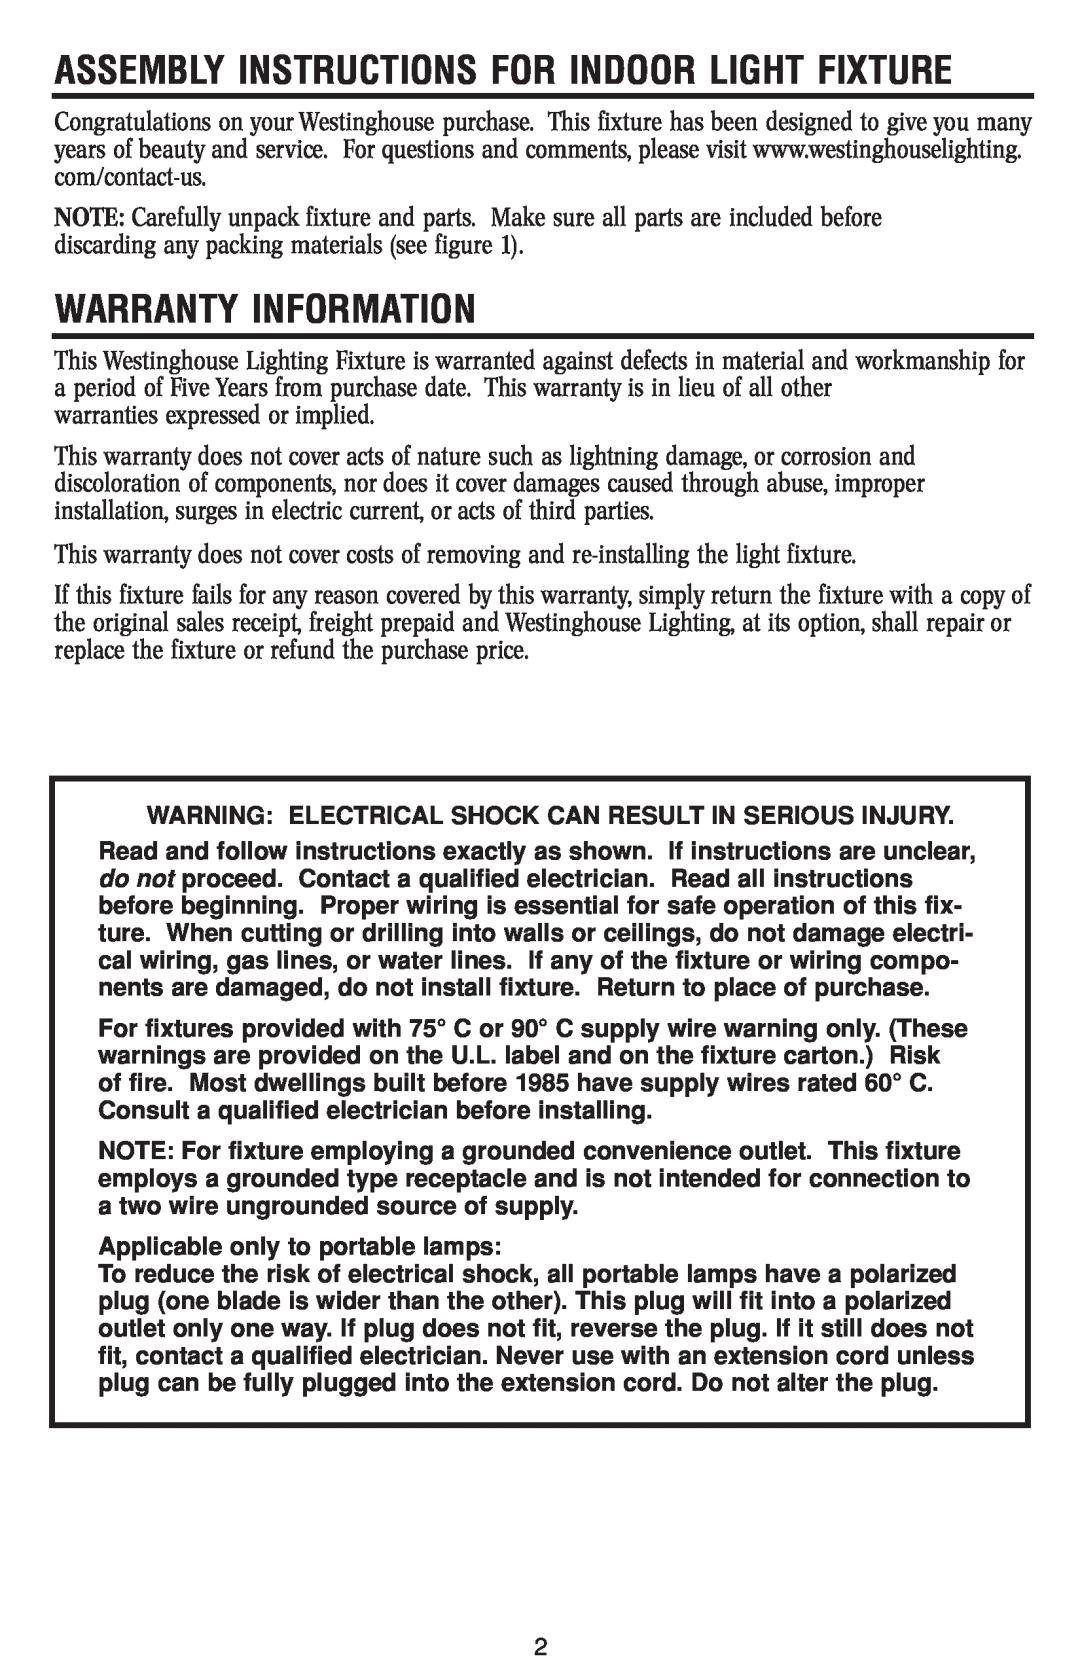 Westinghouse W348 owner manual Warranty Information, Assembly Instructions For Indoor Light Fixture 